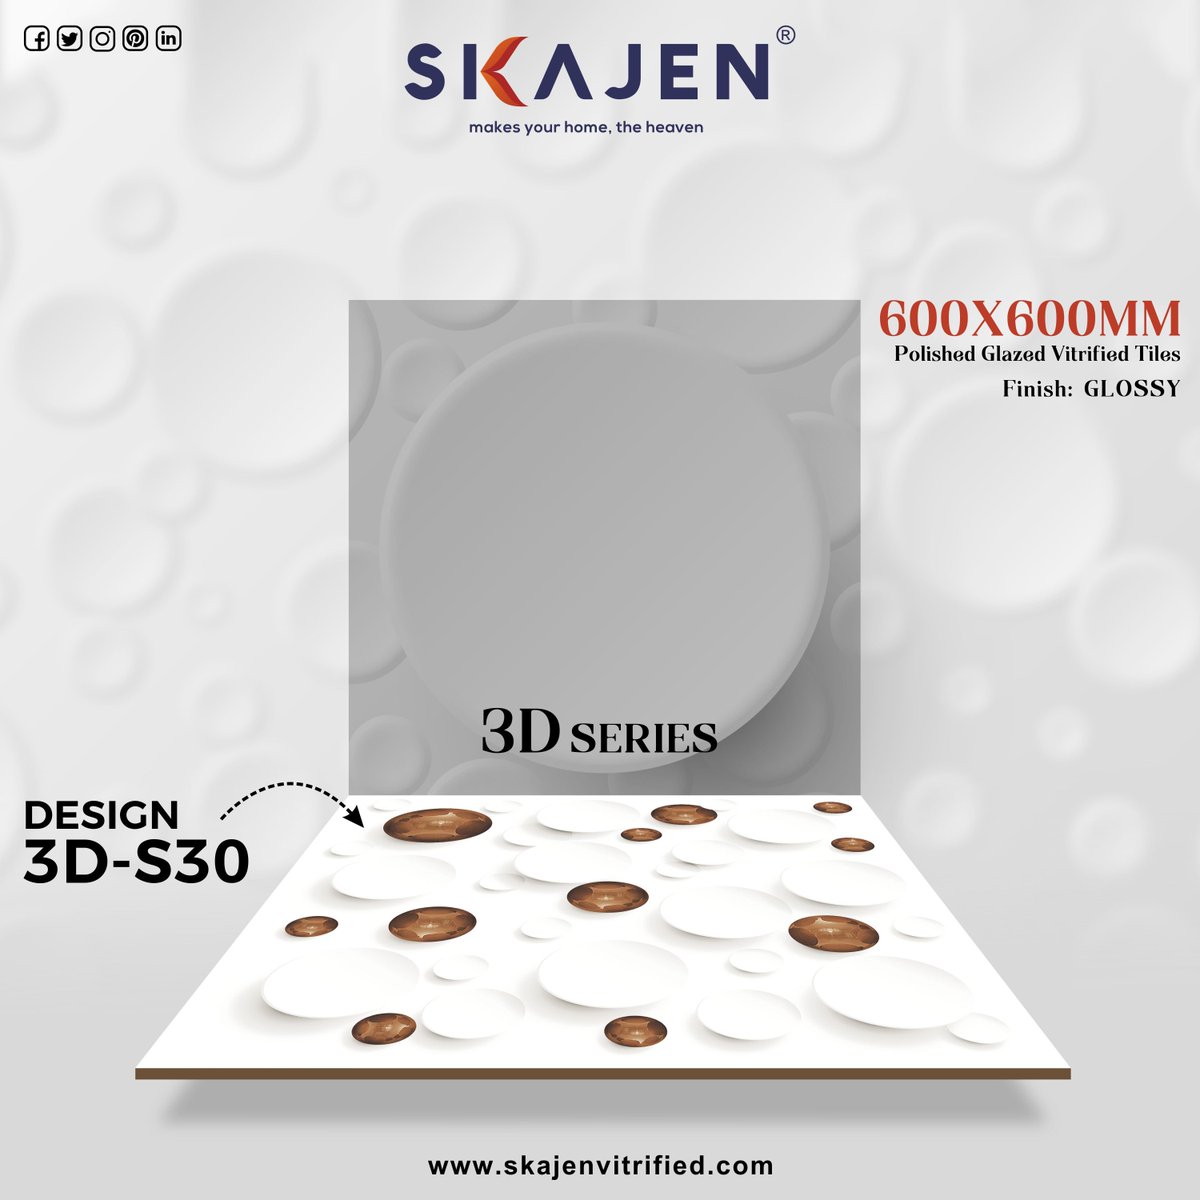 Give your spaces an original style with the perfect fusion between minimalism and creativity expressed through our 3D design tiles.

#3dtiles #3dseries #3dDesign #glossytiles #glazedtiles #skajen #glazed #vitrified #design #architecture #tile #interior #homedecor #flooring